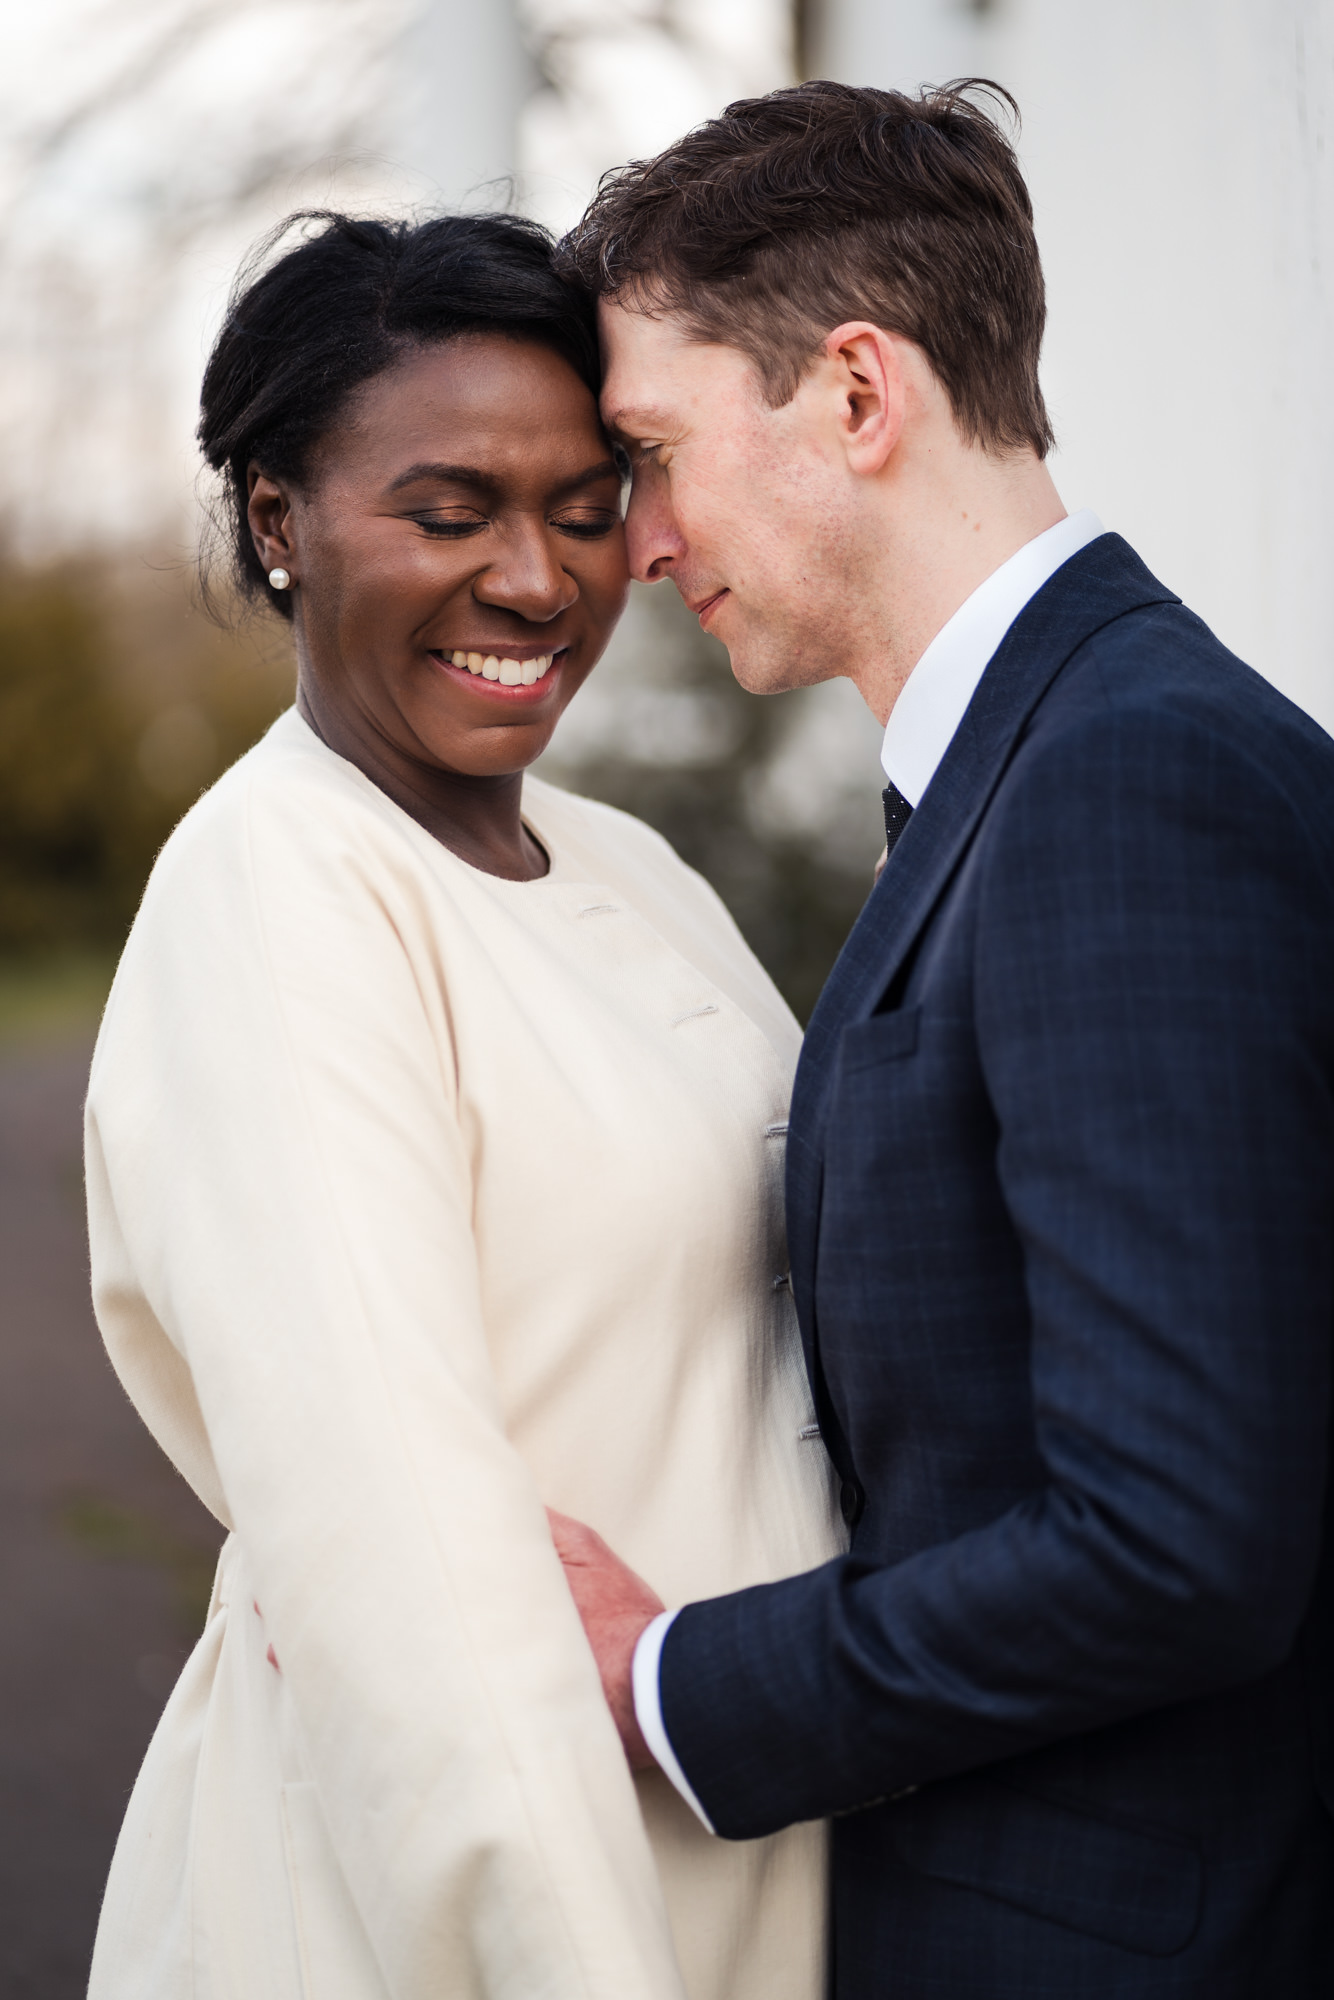 bride and groom embrace and smile for a couple wedding portrait photo